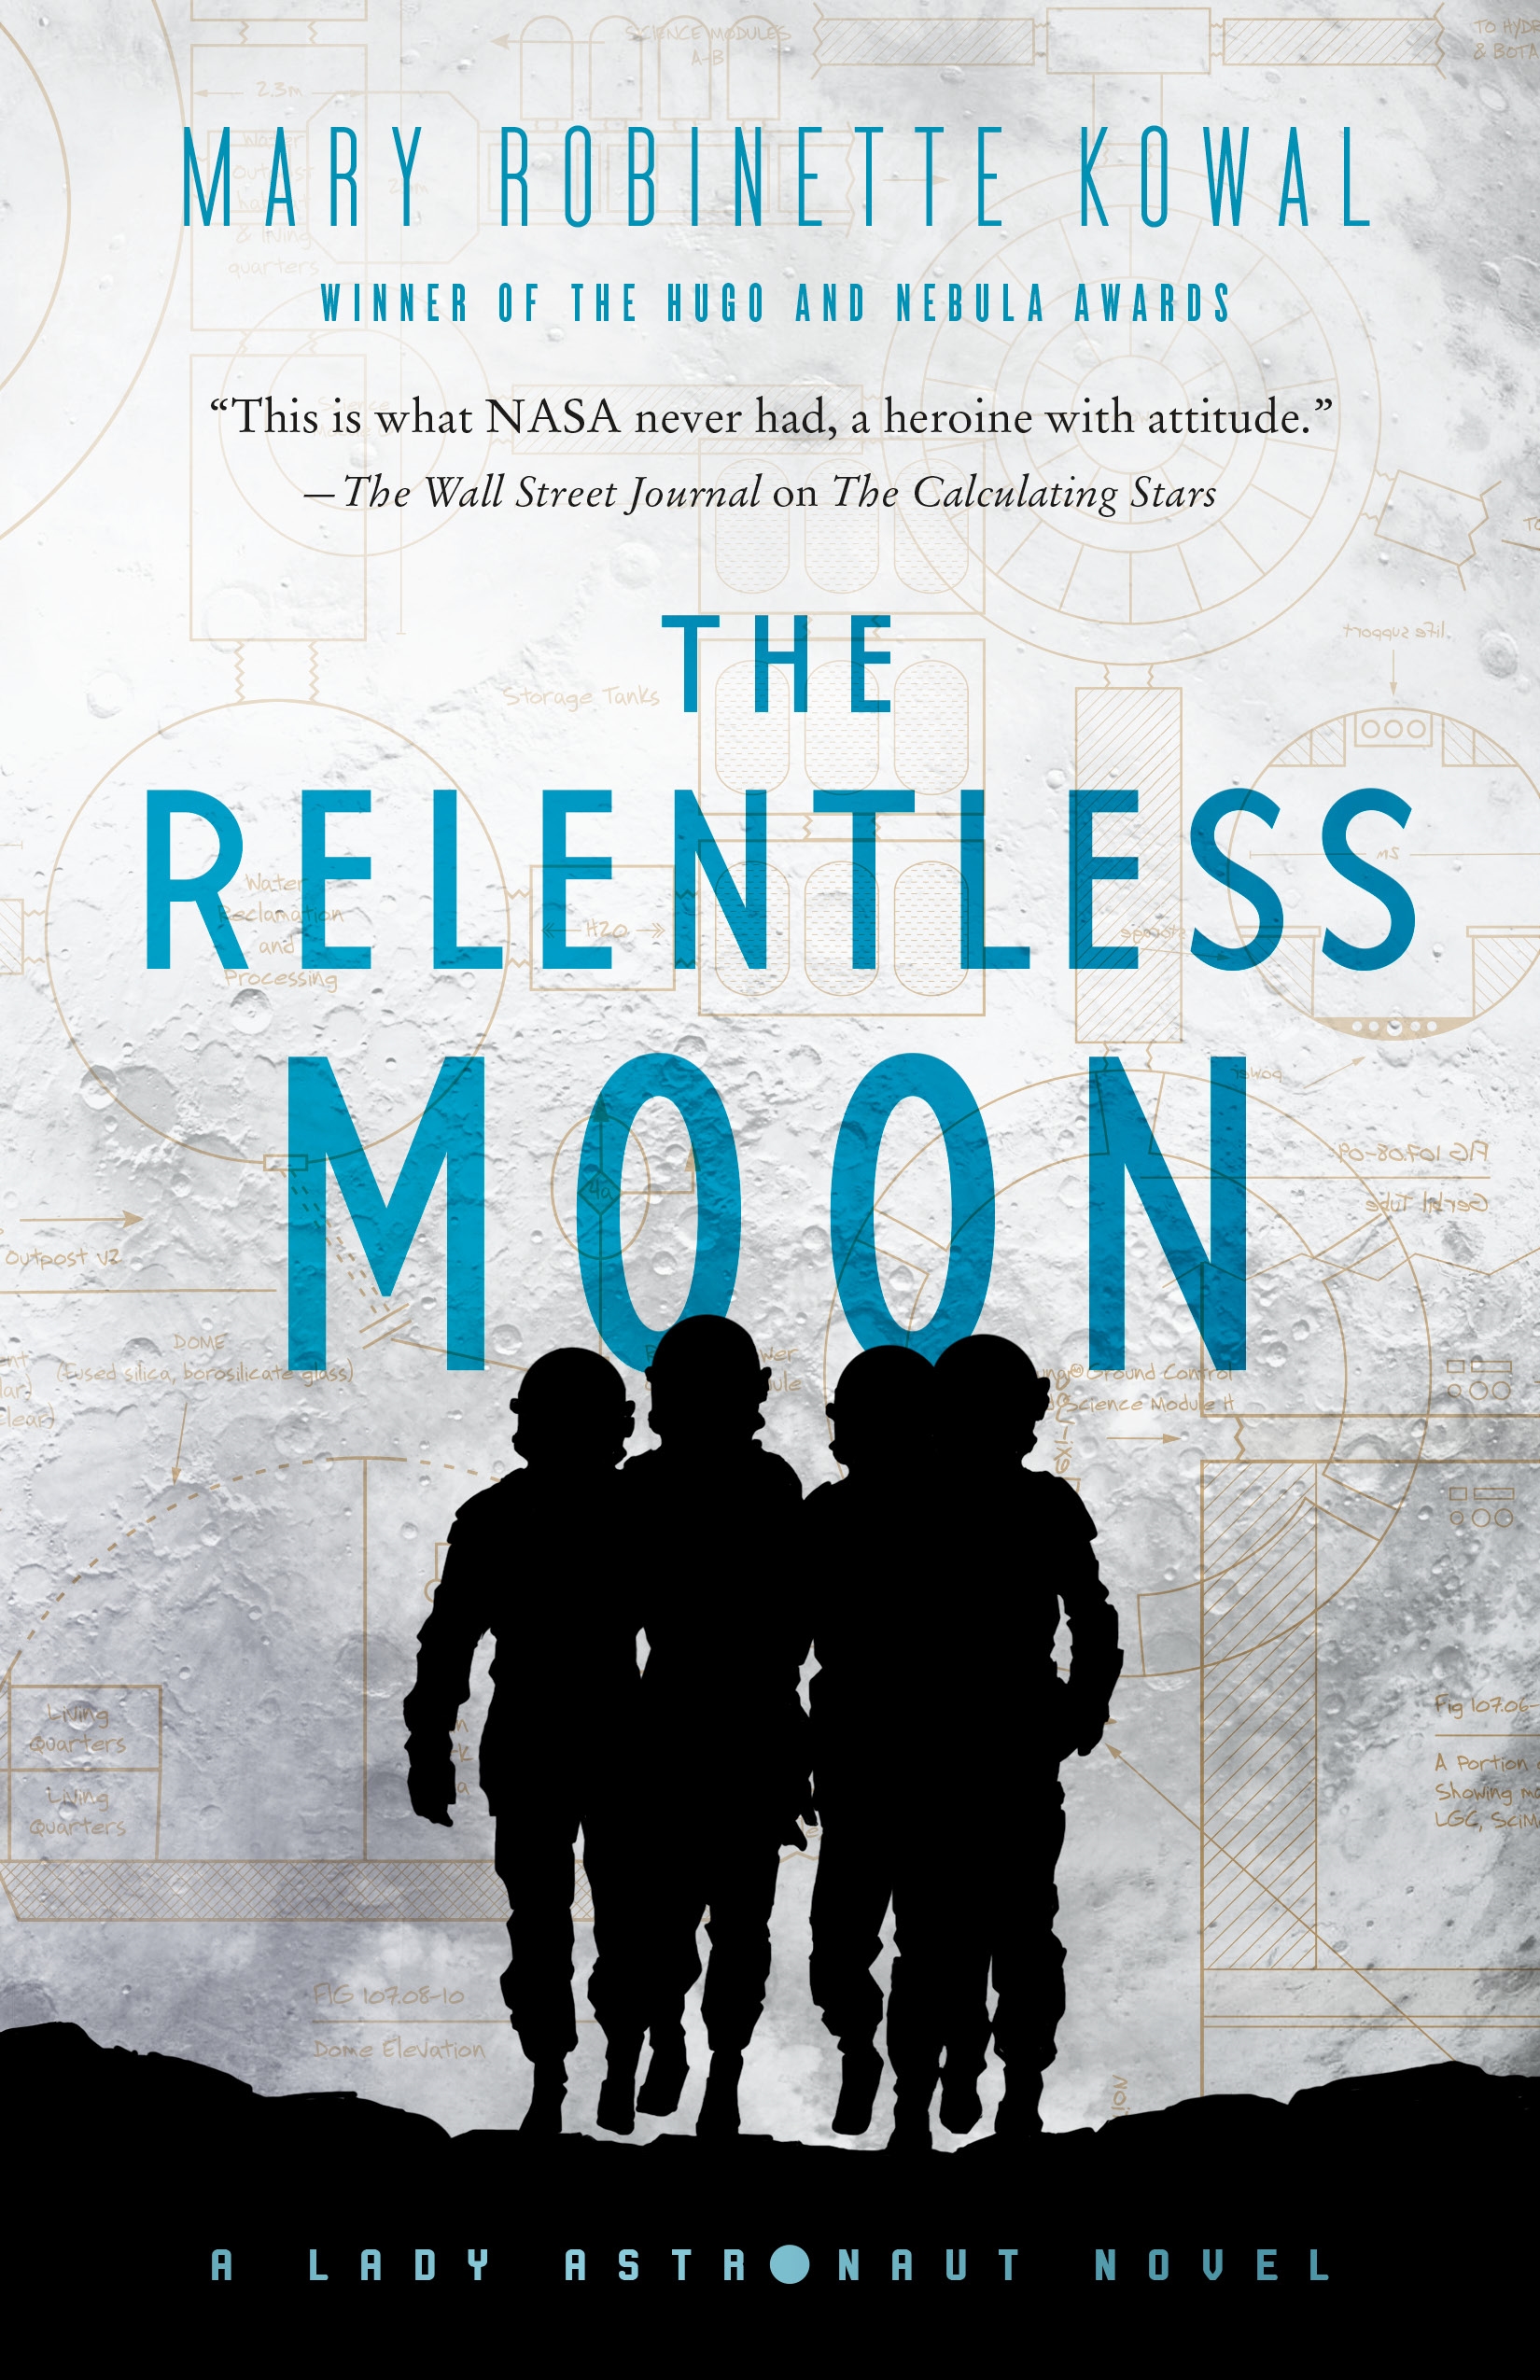 The Relentless Moon : A Lady Astronaut Novel by Mary Robinette Kowal